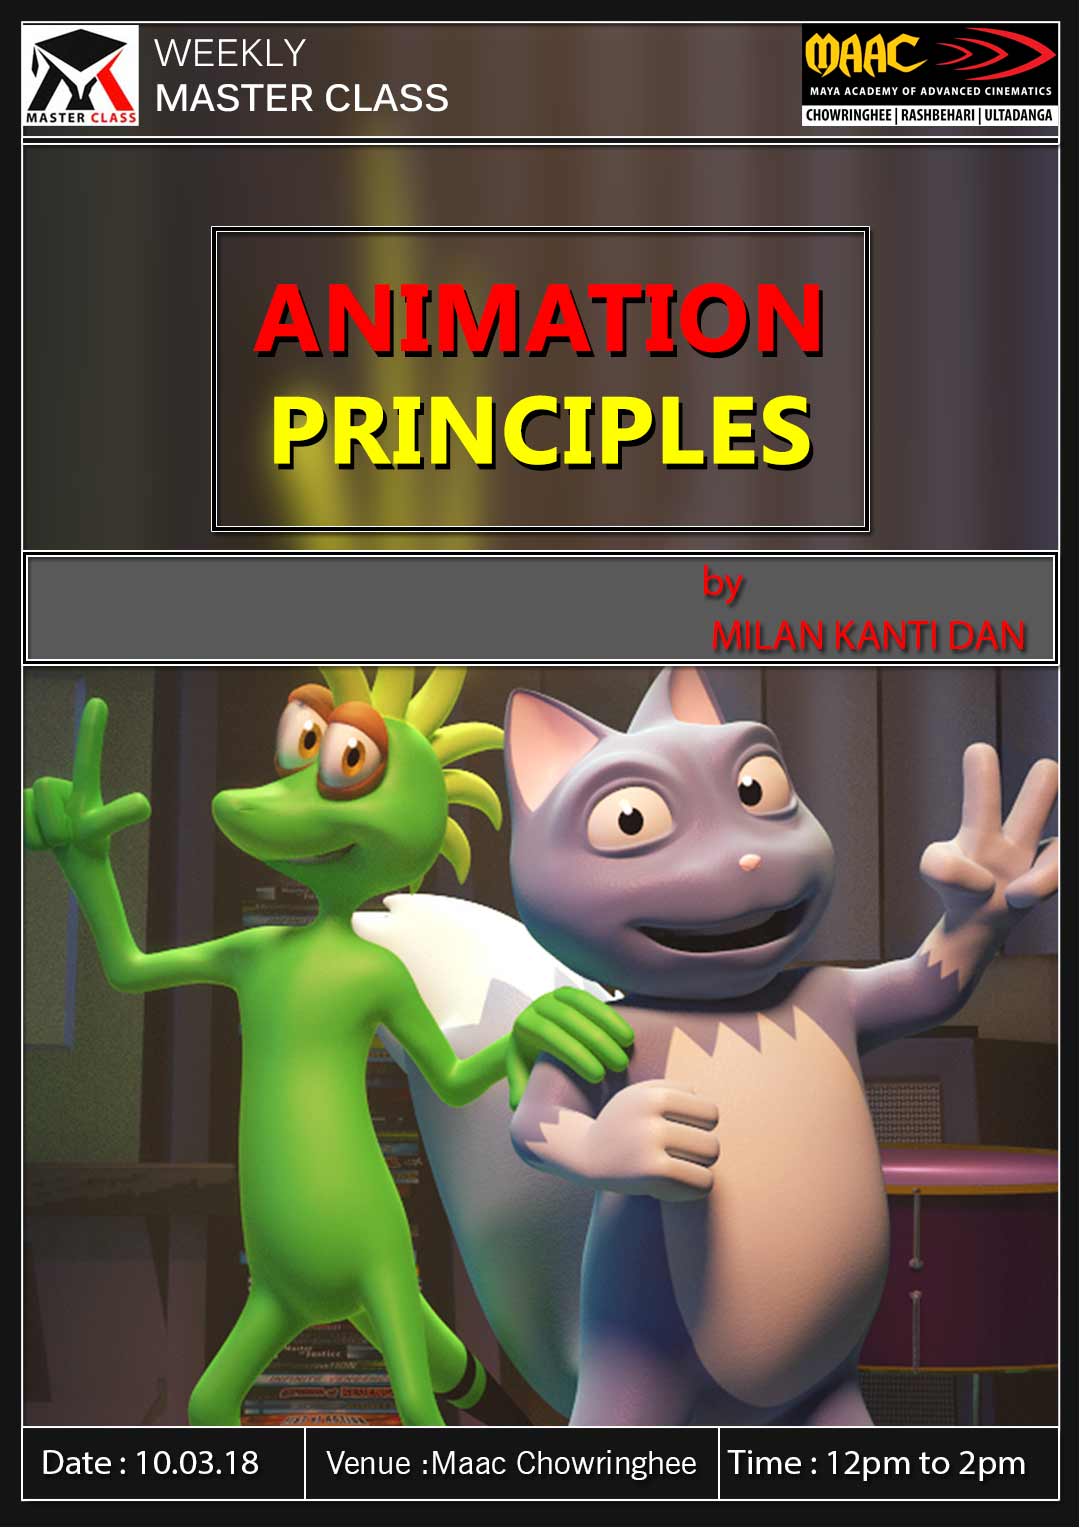 Weekly Master Class on Animation Principles